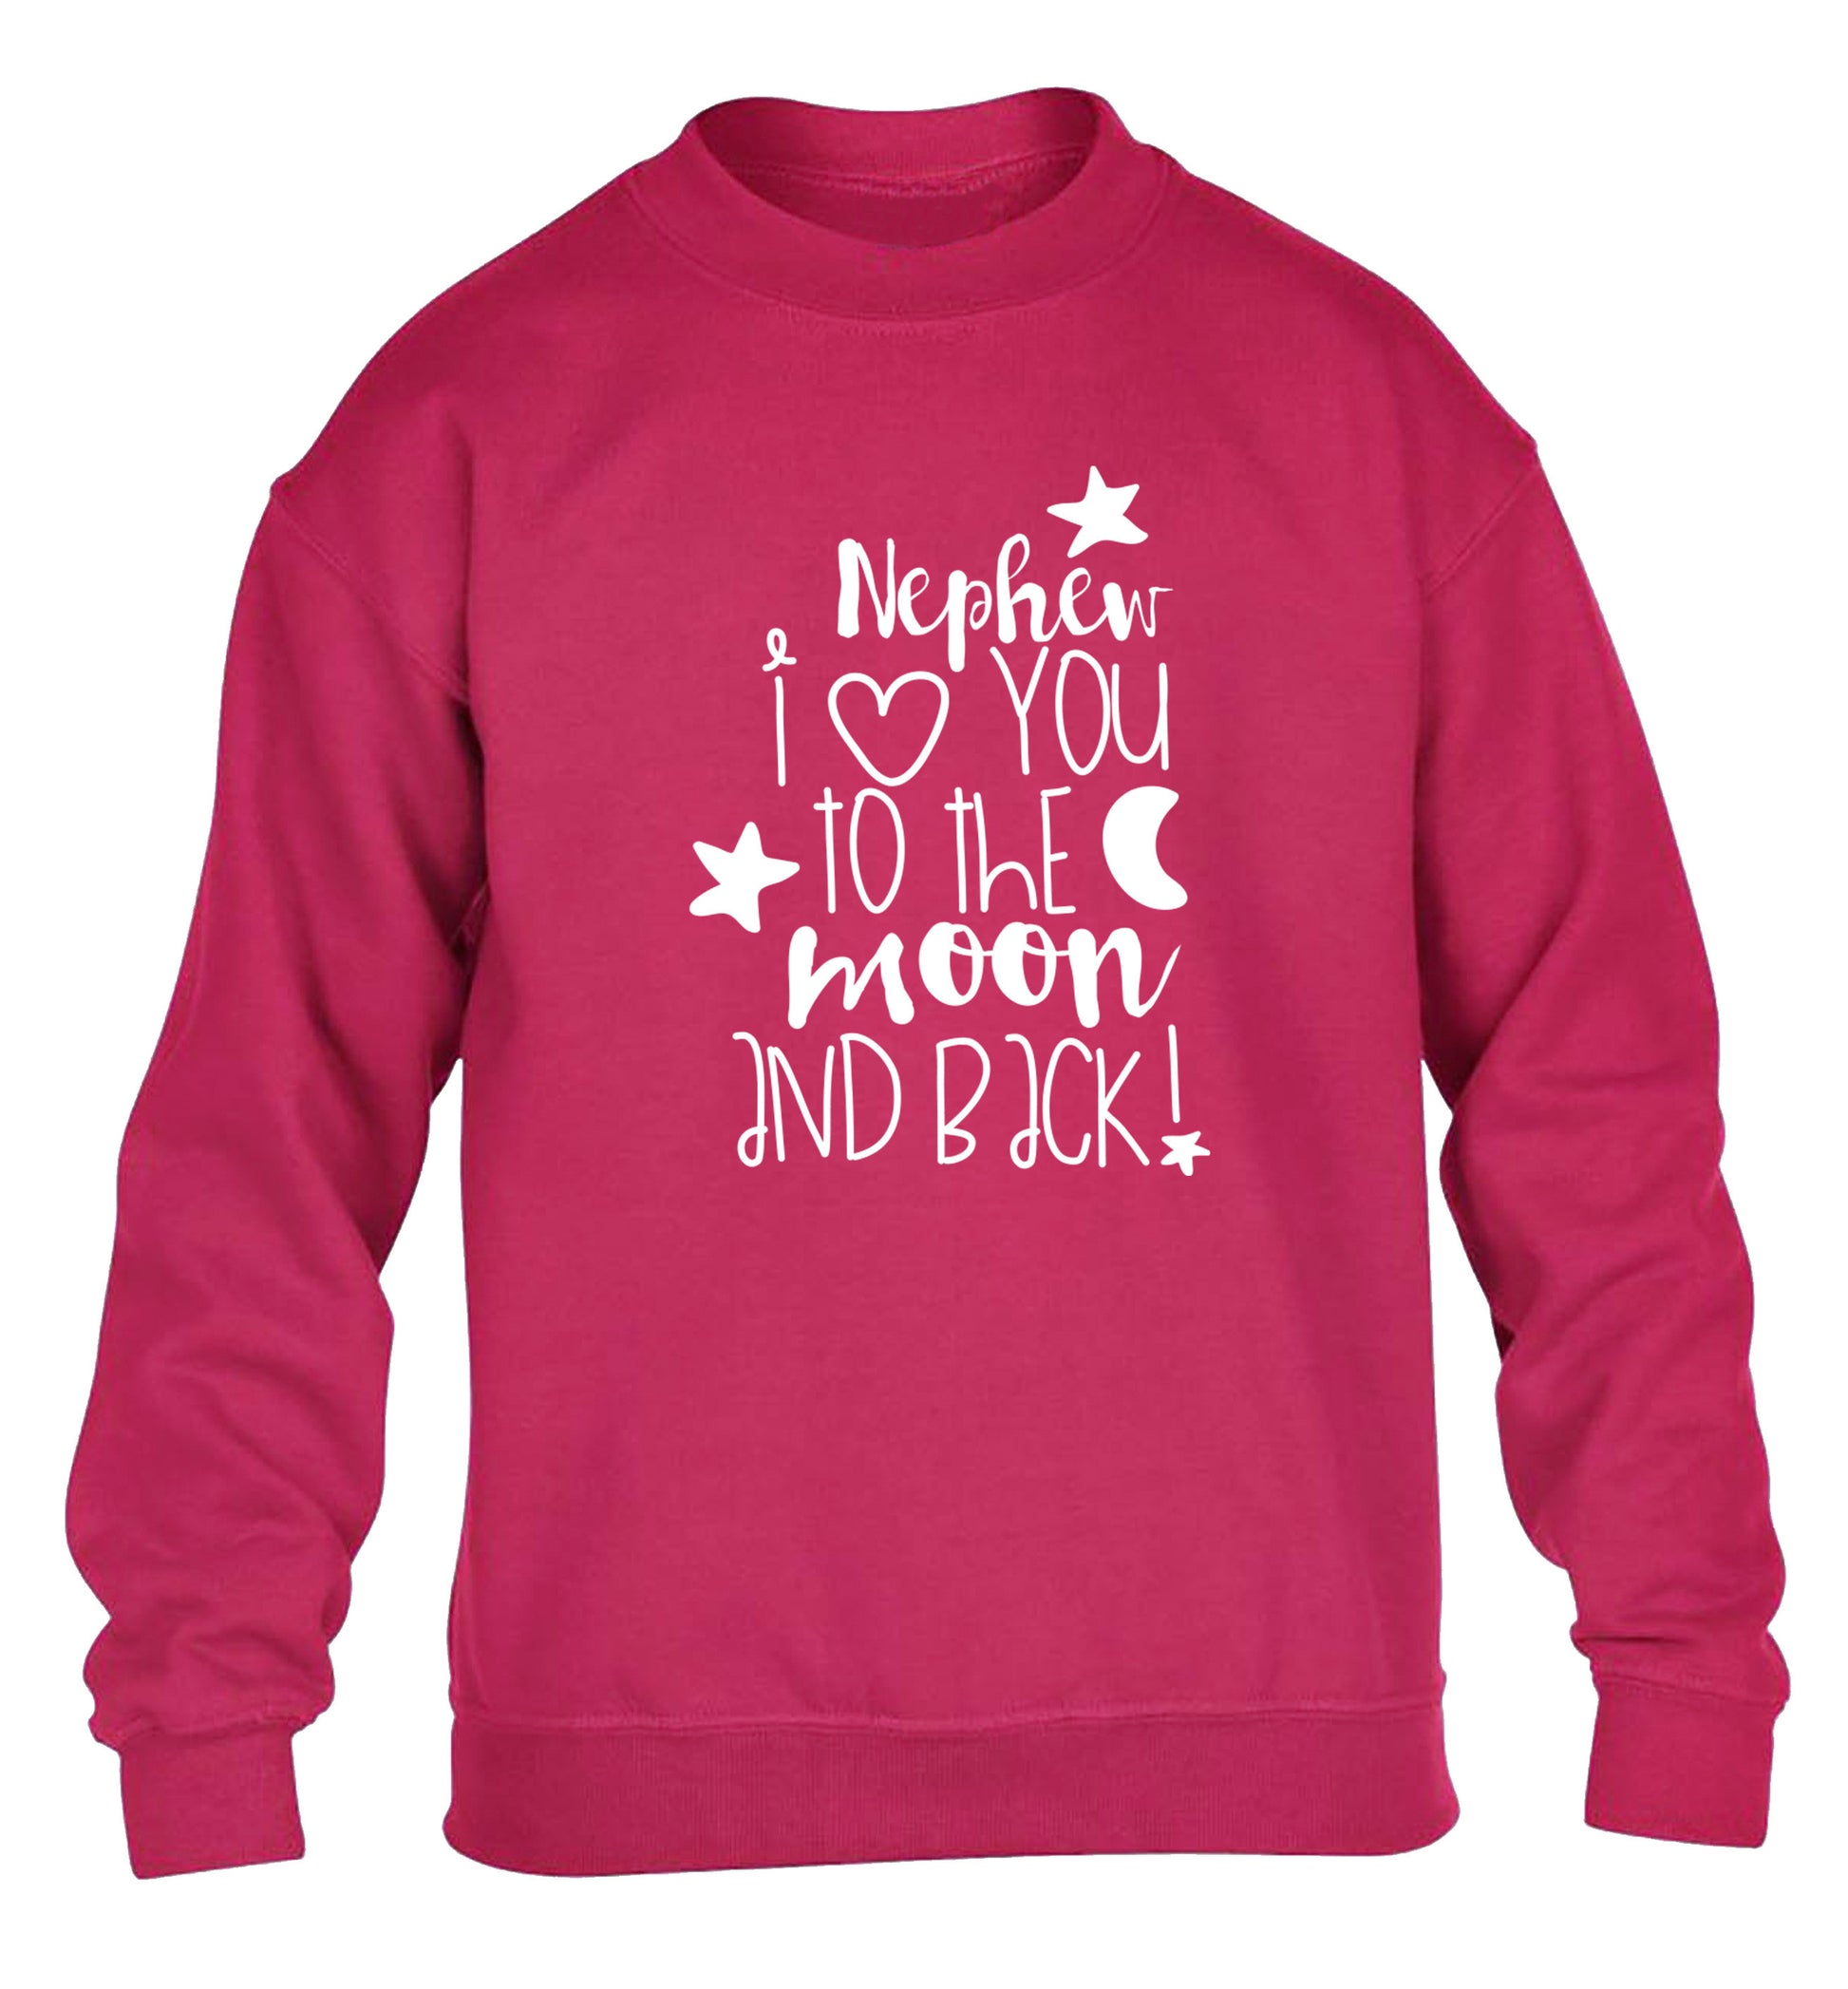 Nephew I love you to the moon and back children's pink  sweater 12-14 Years